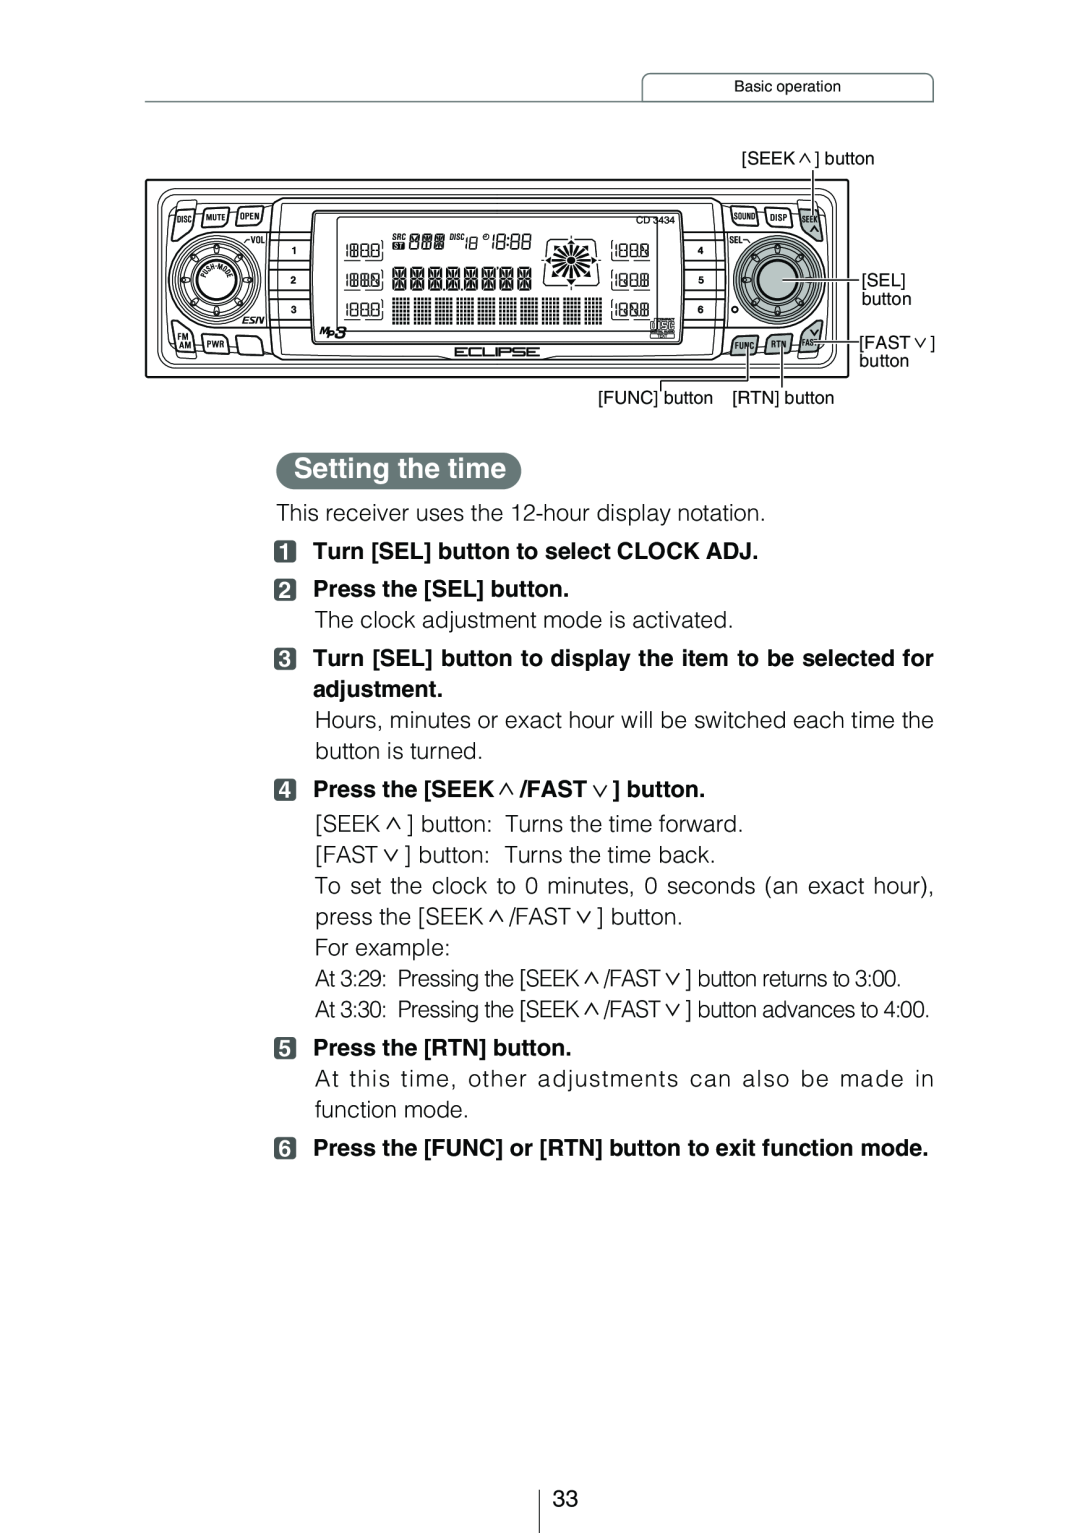 Eclipse - Fujitsu Ten CD3434 owner manual Setting the time, Turn SEL button to select CLOCK ADJ 2 Press the SEL button 